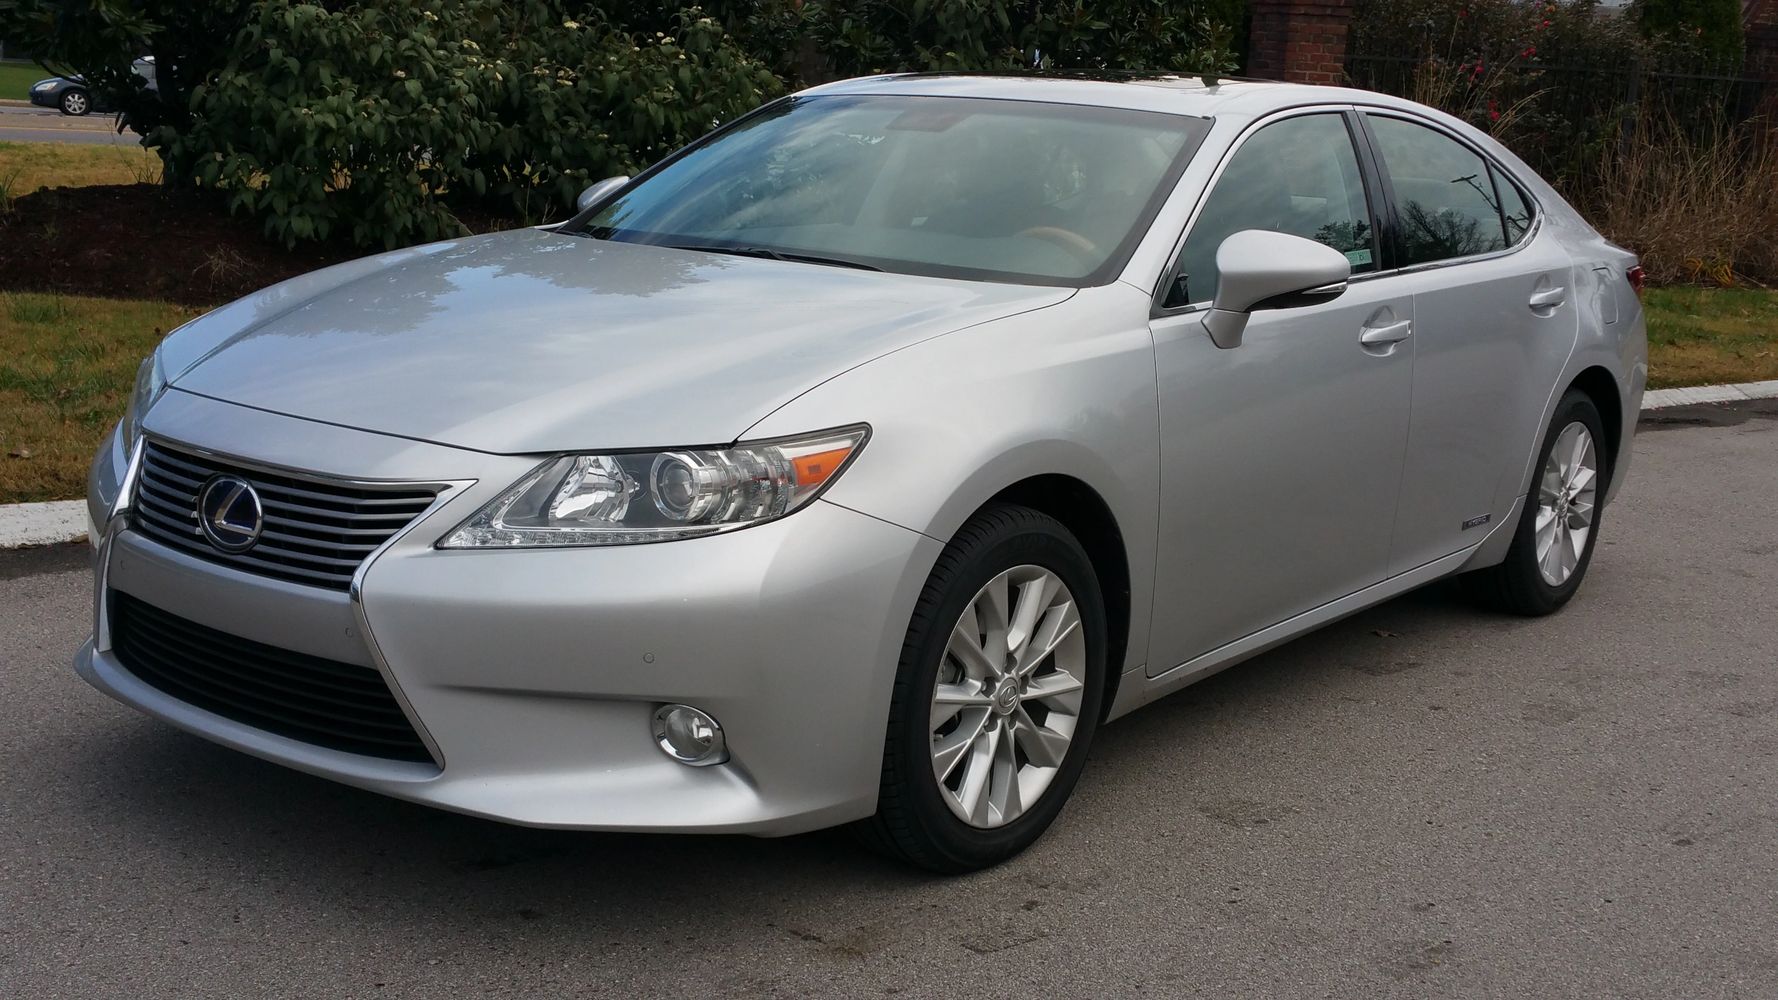 2013 Lexus ES 300 h. 8 way power front seat. Roomy back seat. Ample trunk space.